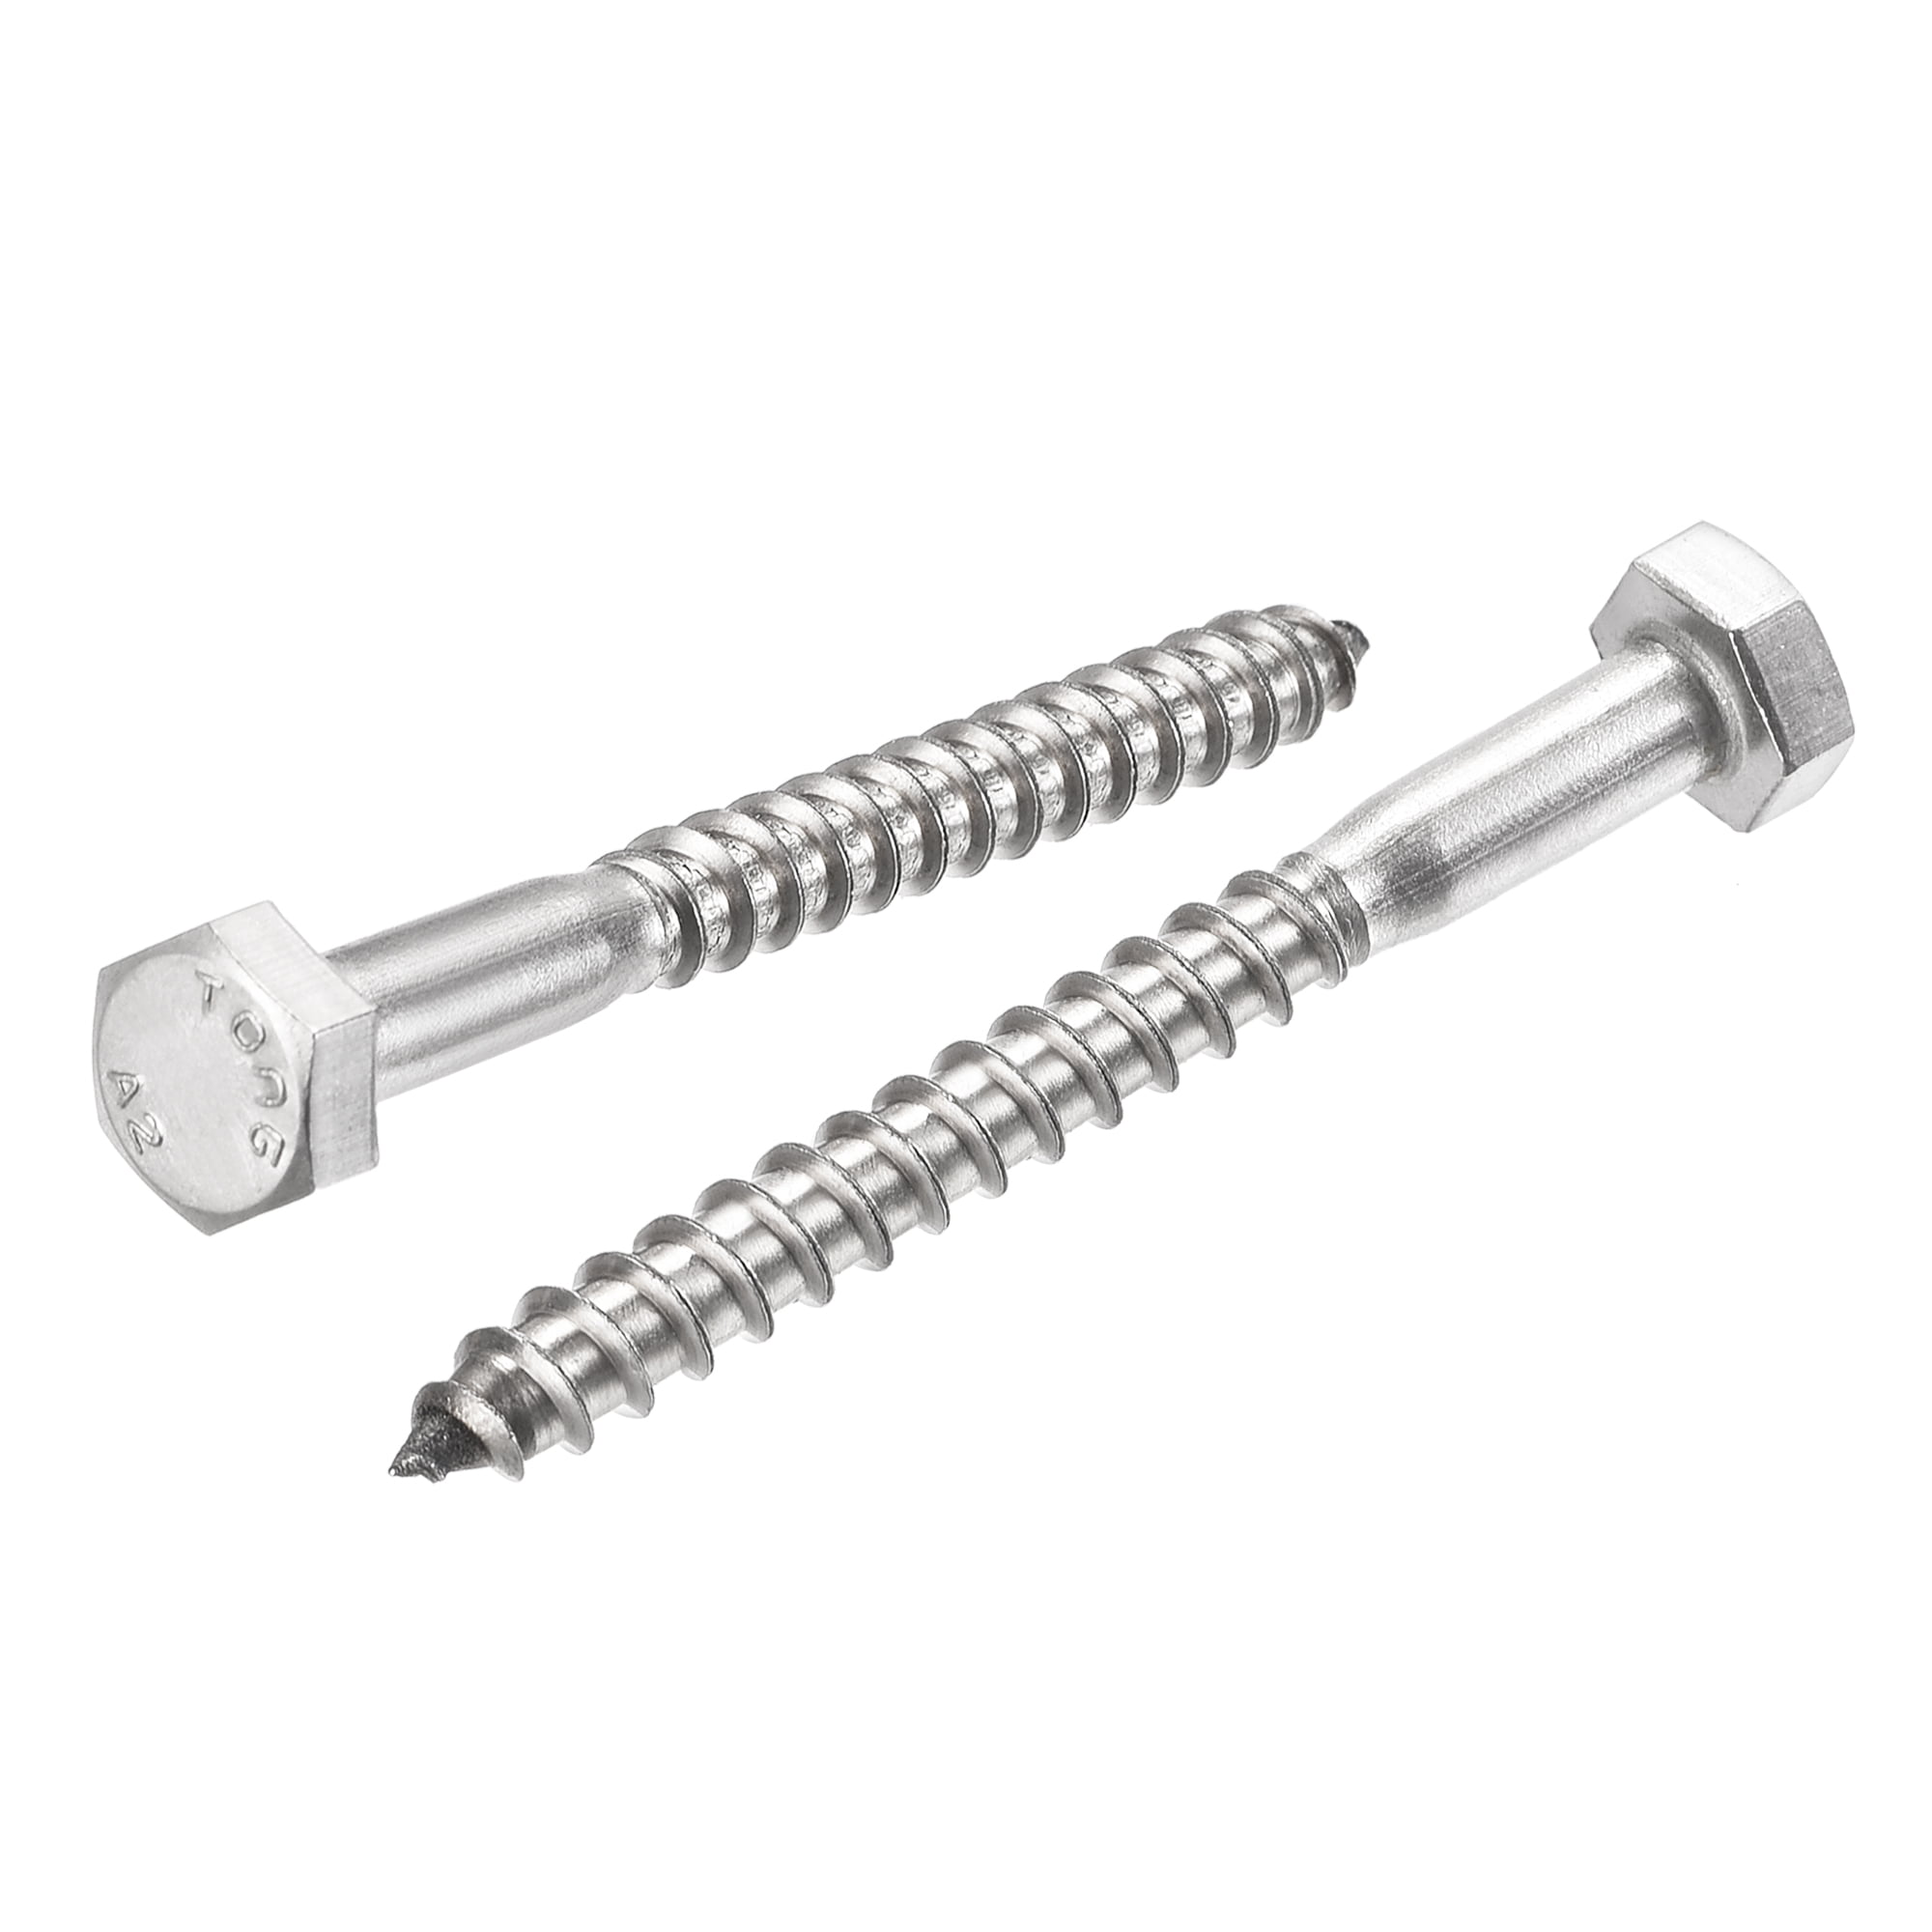 2IN Zinc Plated Hex Head Coach Lag Screw Bolt CLEARANCE 5/16 50mm 